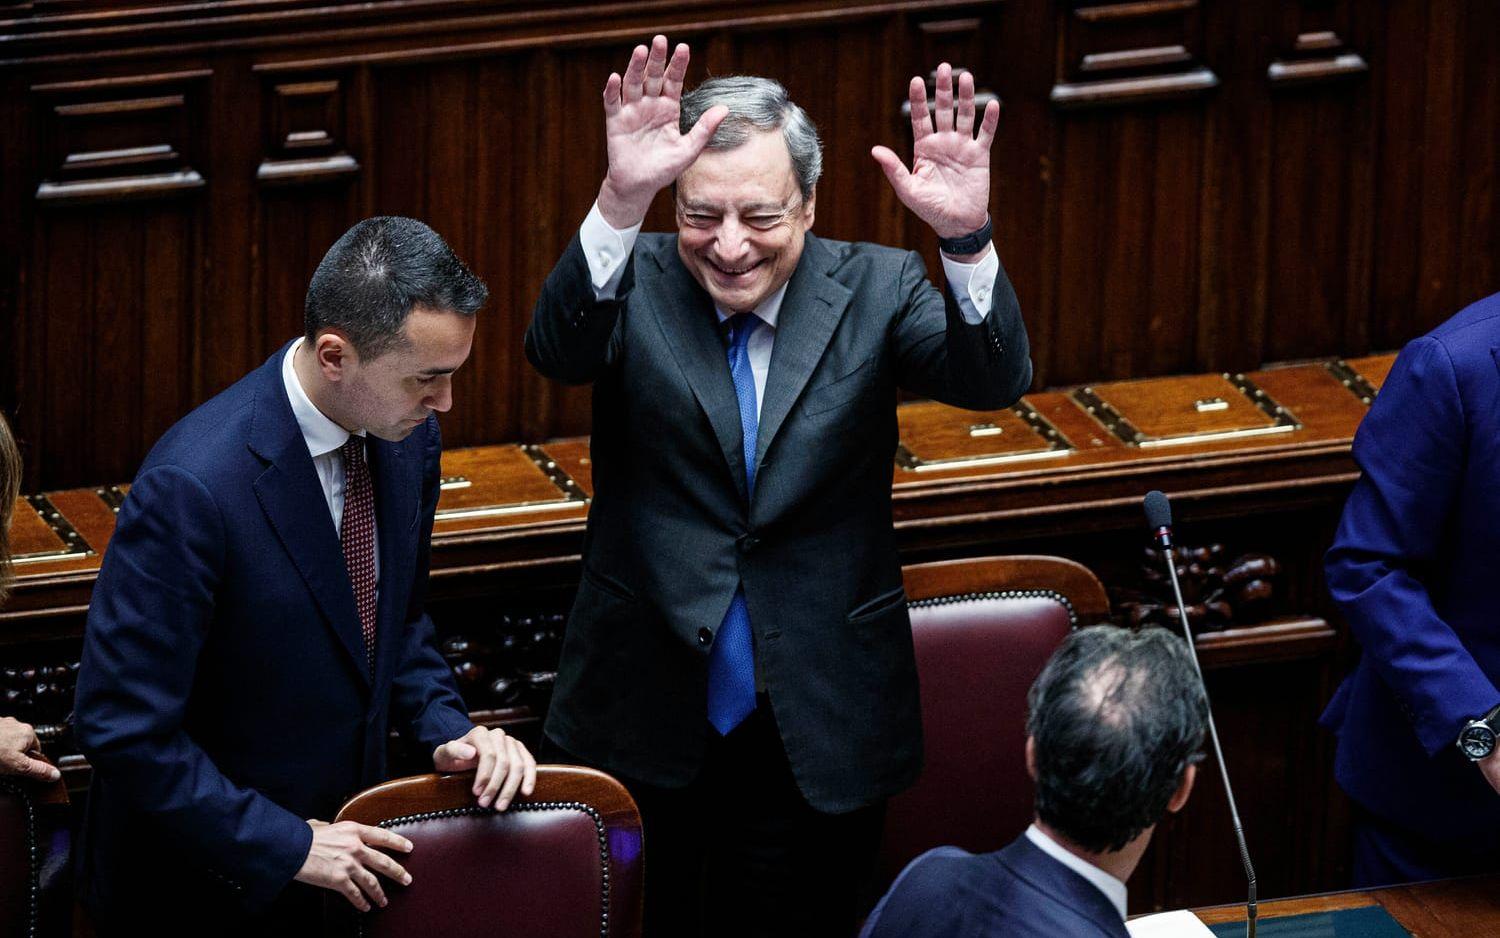 Italian Premier Mario Draghi waves after delivering his address at the Parliament in Rome, Thursday, July 21, 2022. Premier Mario Draghi's national unity government headed for collapse Thursday after key coalition allies boycotted a confidence vote, signaling the likelihood of early elections and a renewed period of uncertainty for Italy and Europe at a critical time. (Roberto Monaldo/LaPresse via AP)  FP101